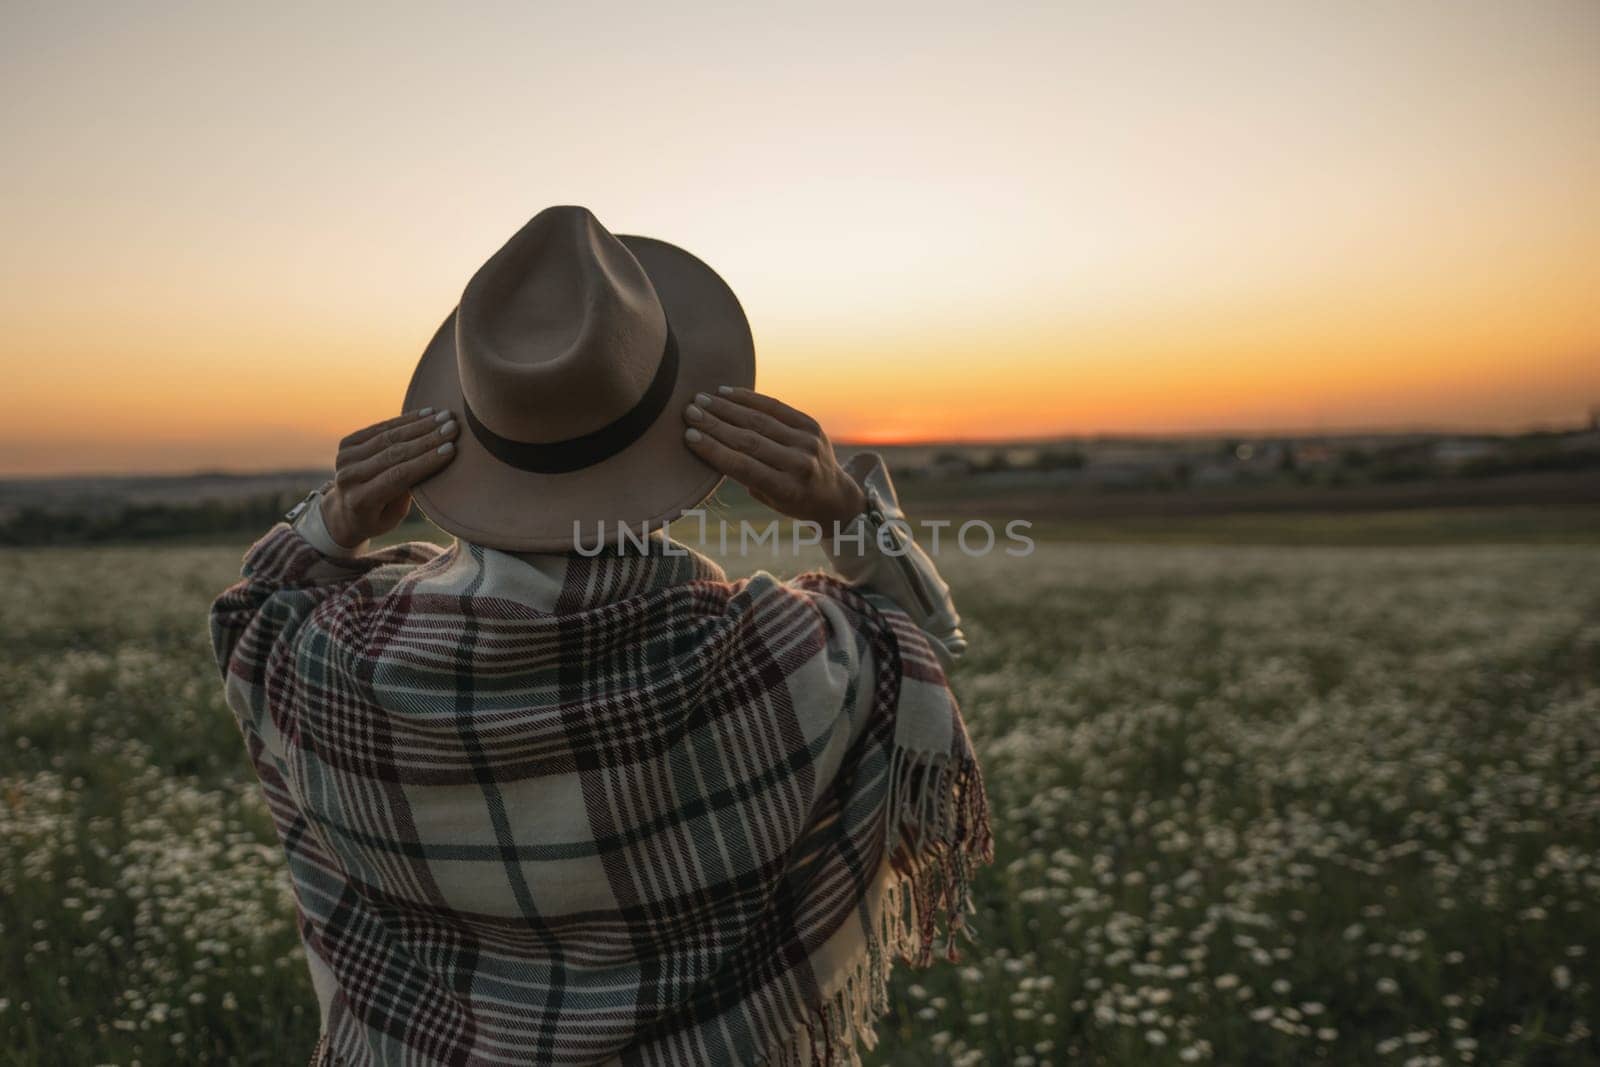 A woman wearing a hat and a plaid blanket stands in a field of flowers. The sky is orange and the sun is setting